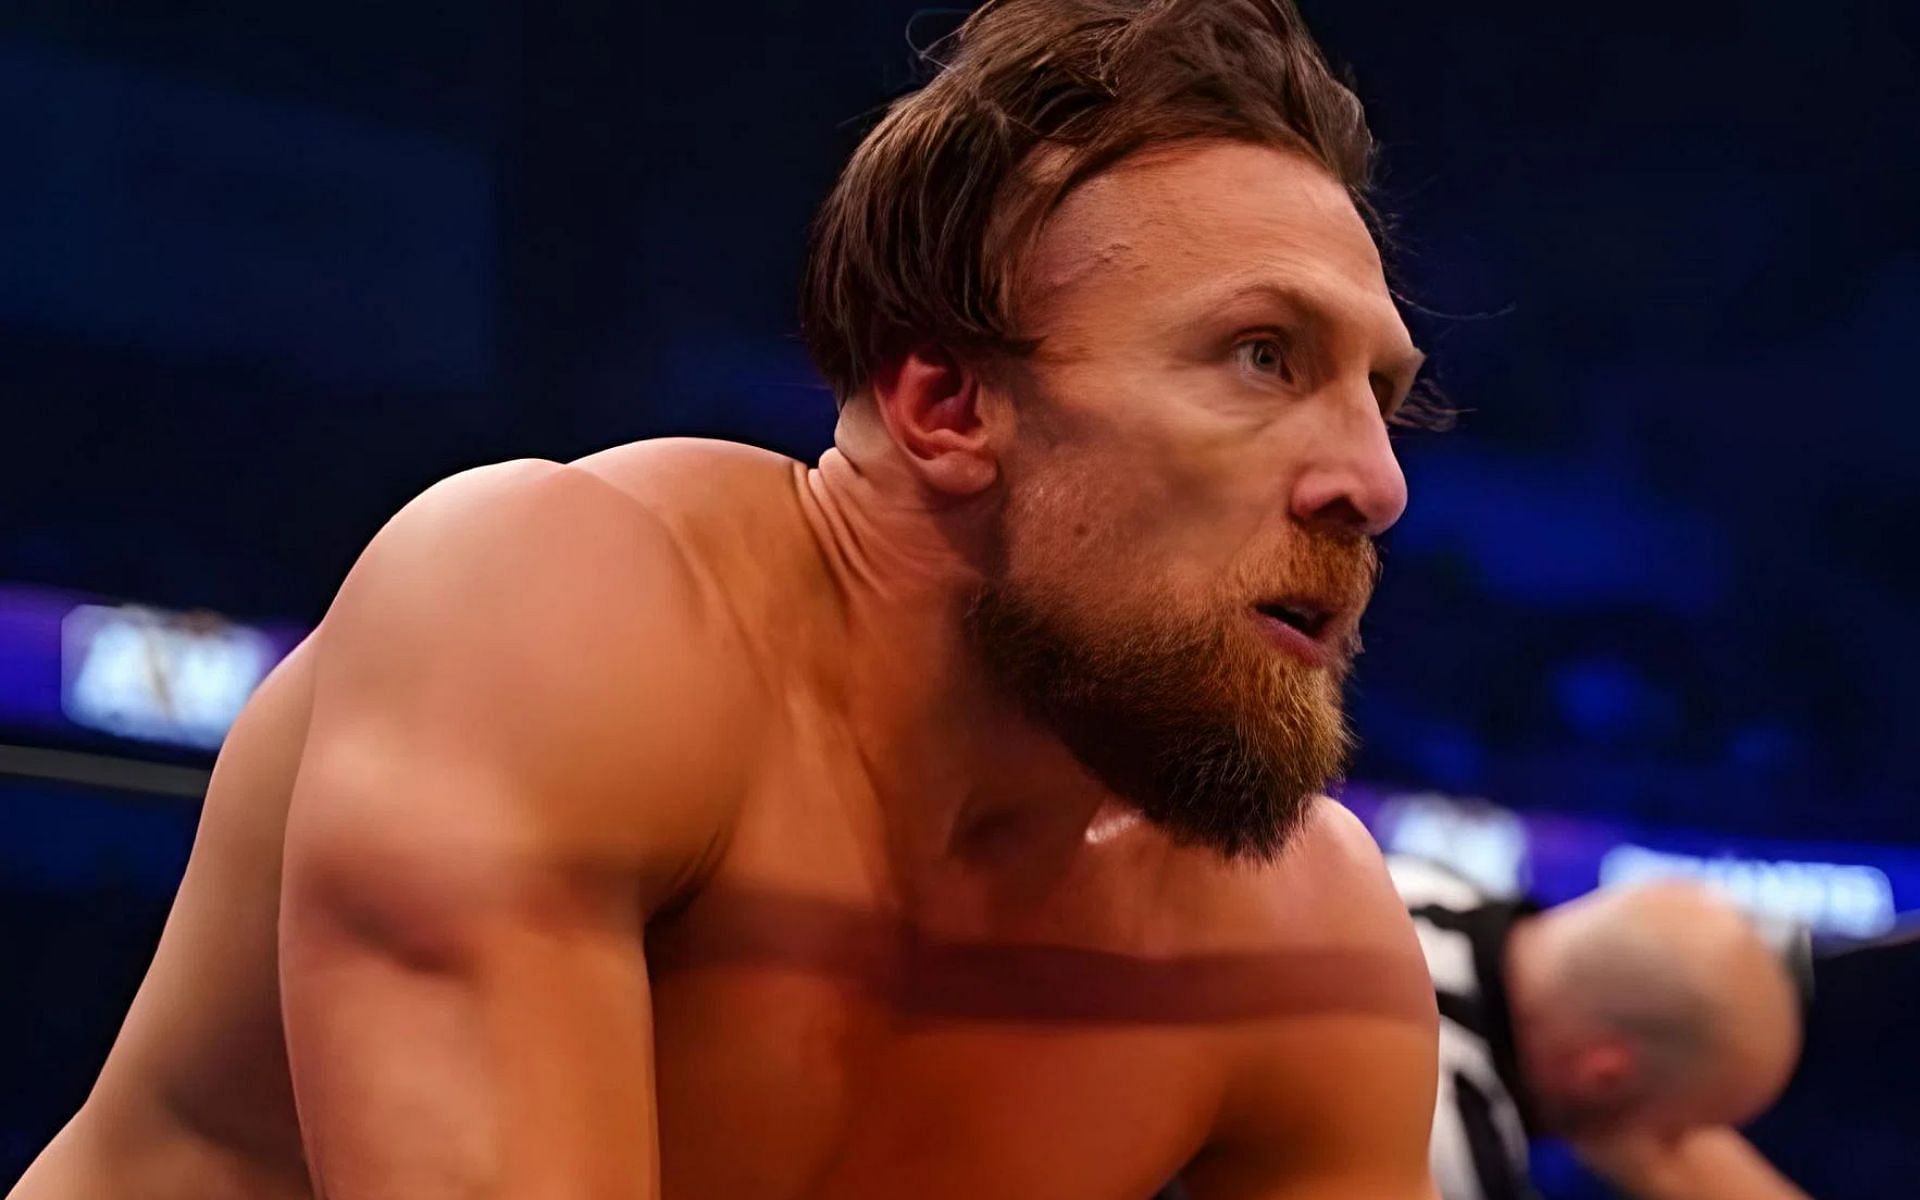 Bryan Danielson is considered one of the best wrestlers of this generation